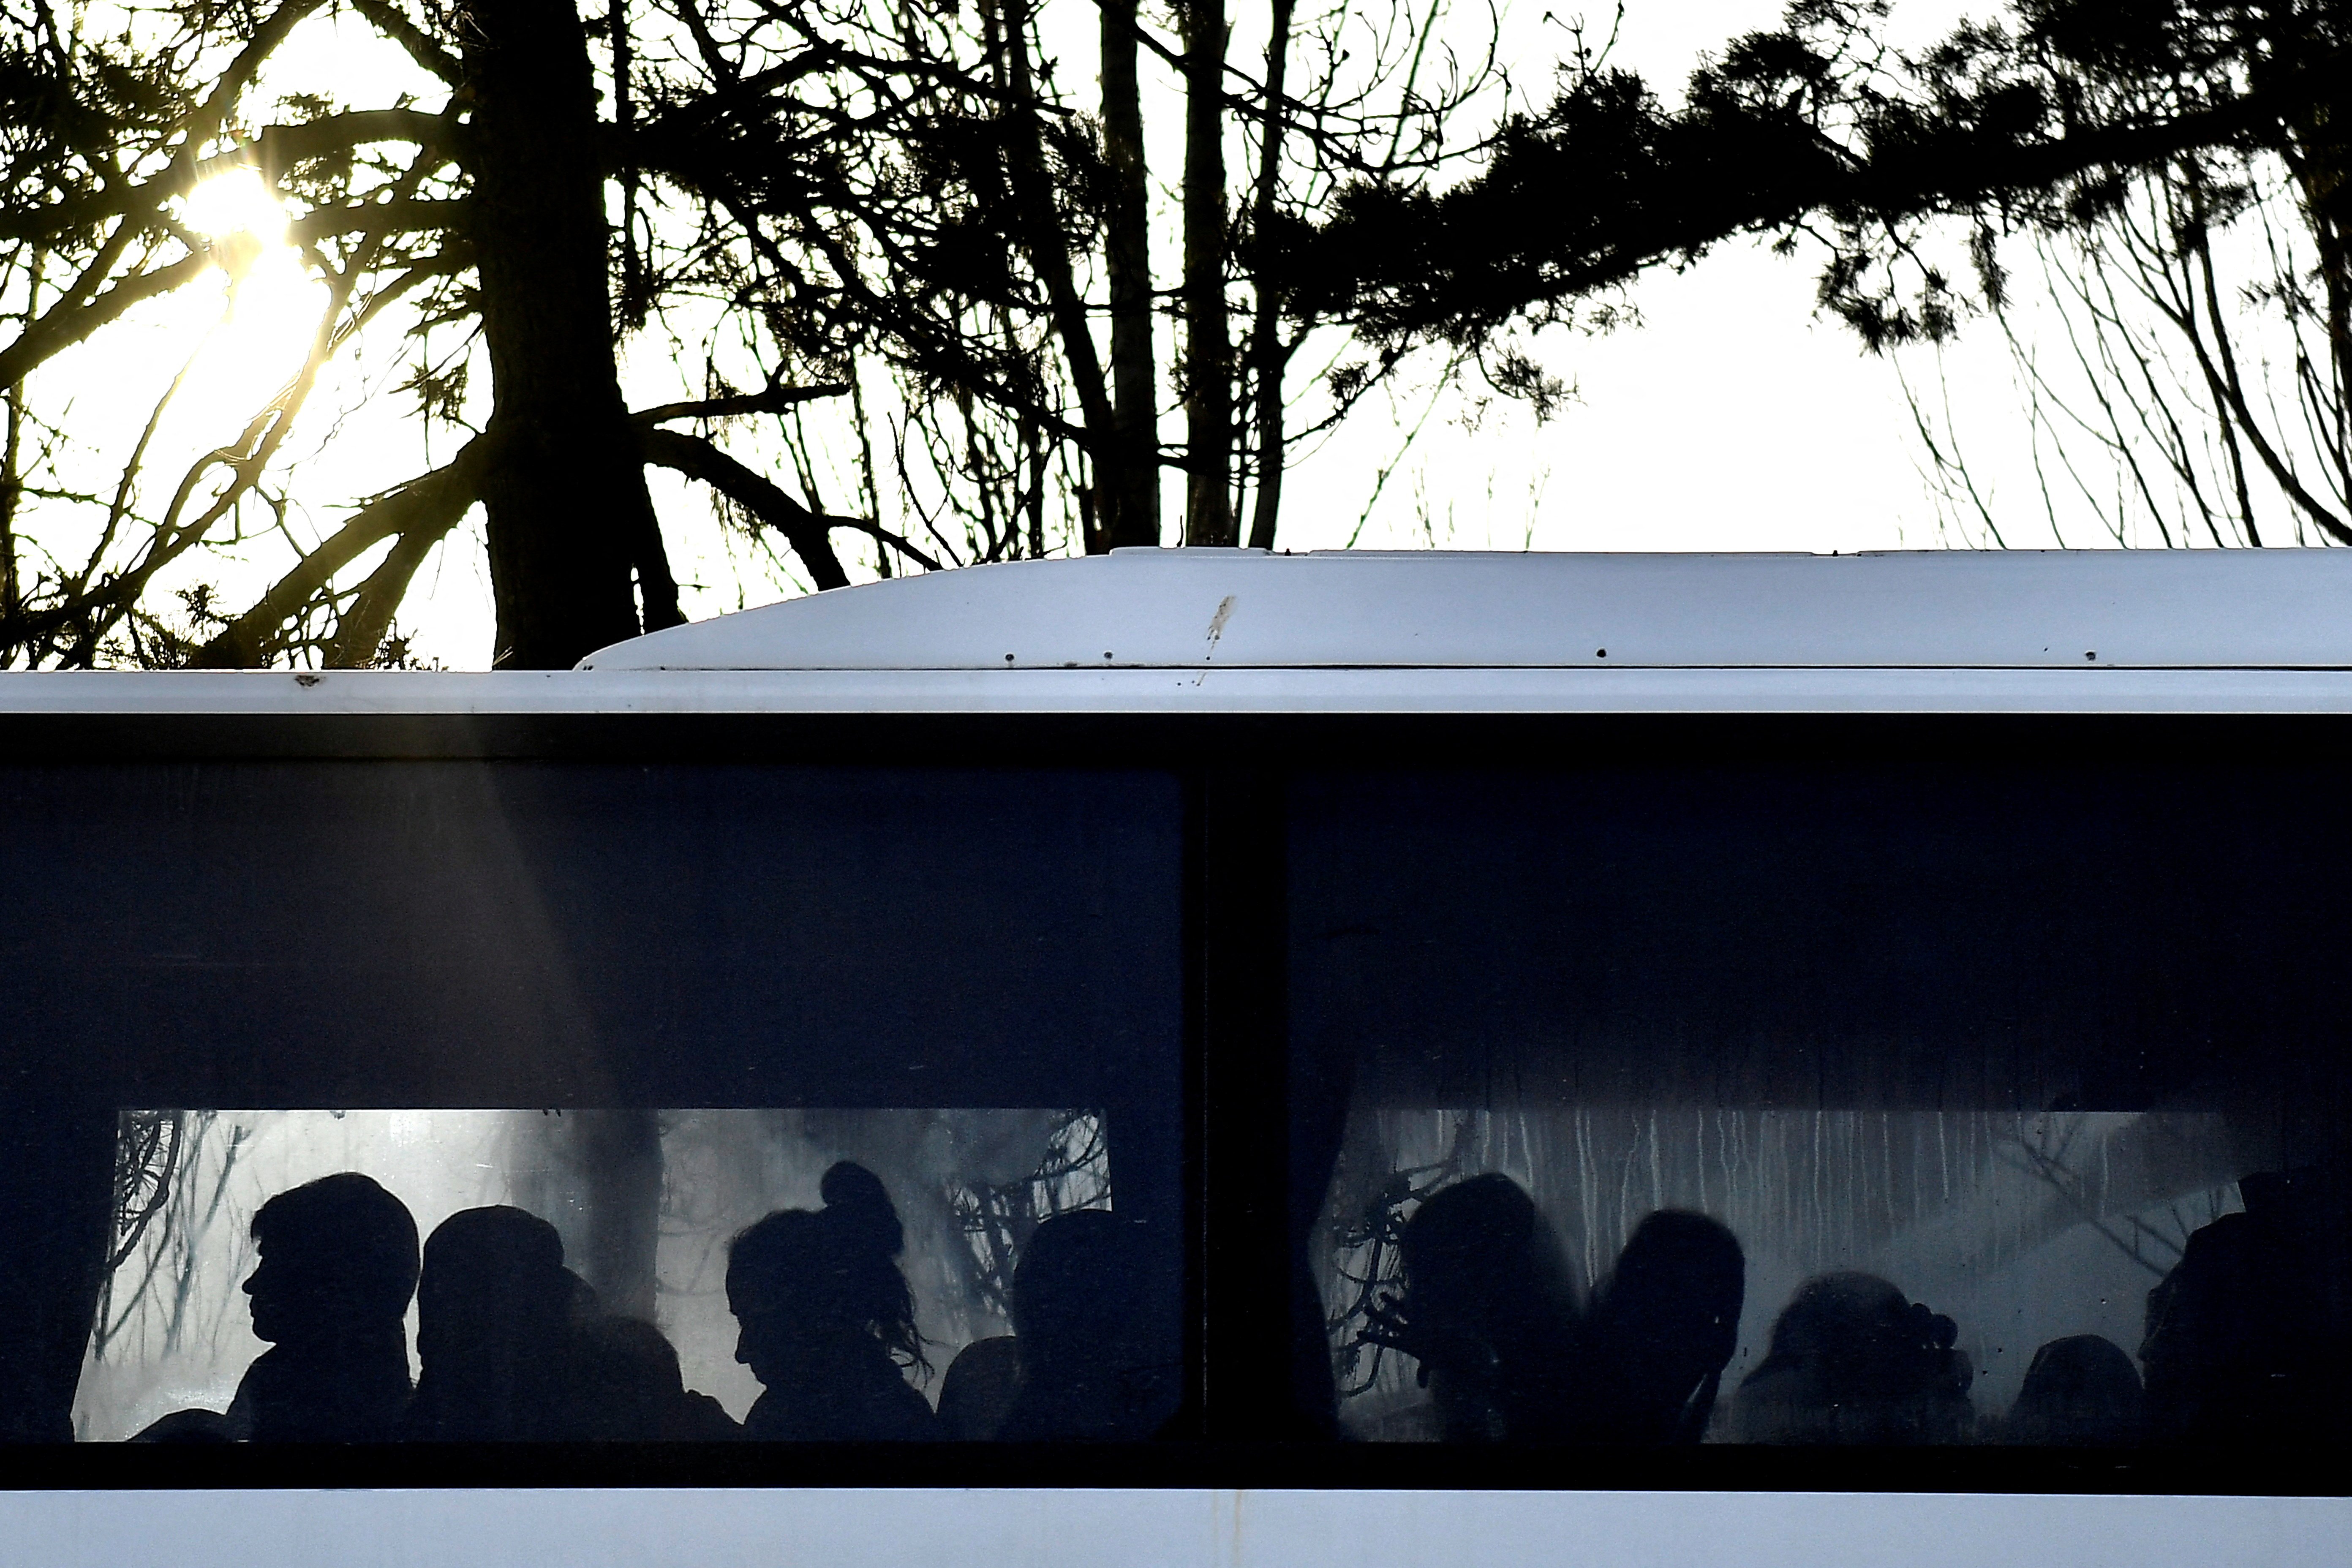 People sit on a bus after fleeing from Ukraine to Romania, following Russia's invasion of Ukraine, at the border crossing March 12 in Siret, Romania. (CNS/Reuters/Clodagh Kilcoyne)